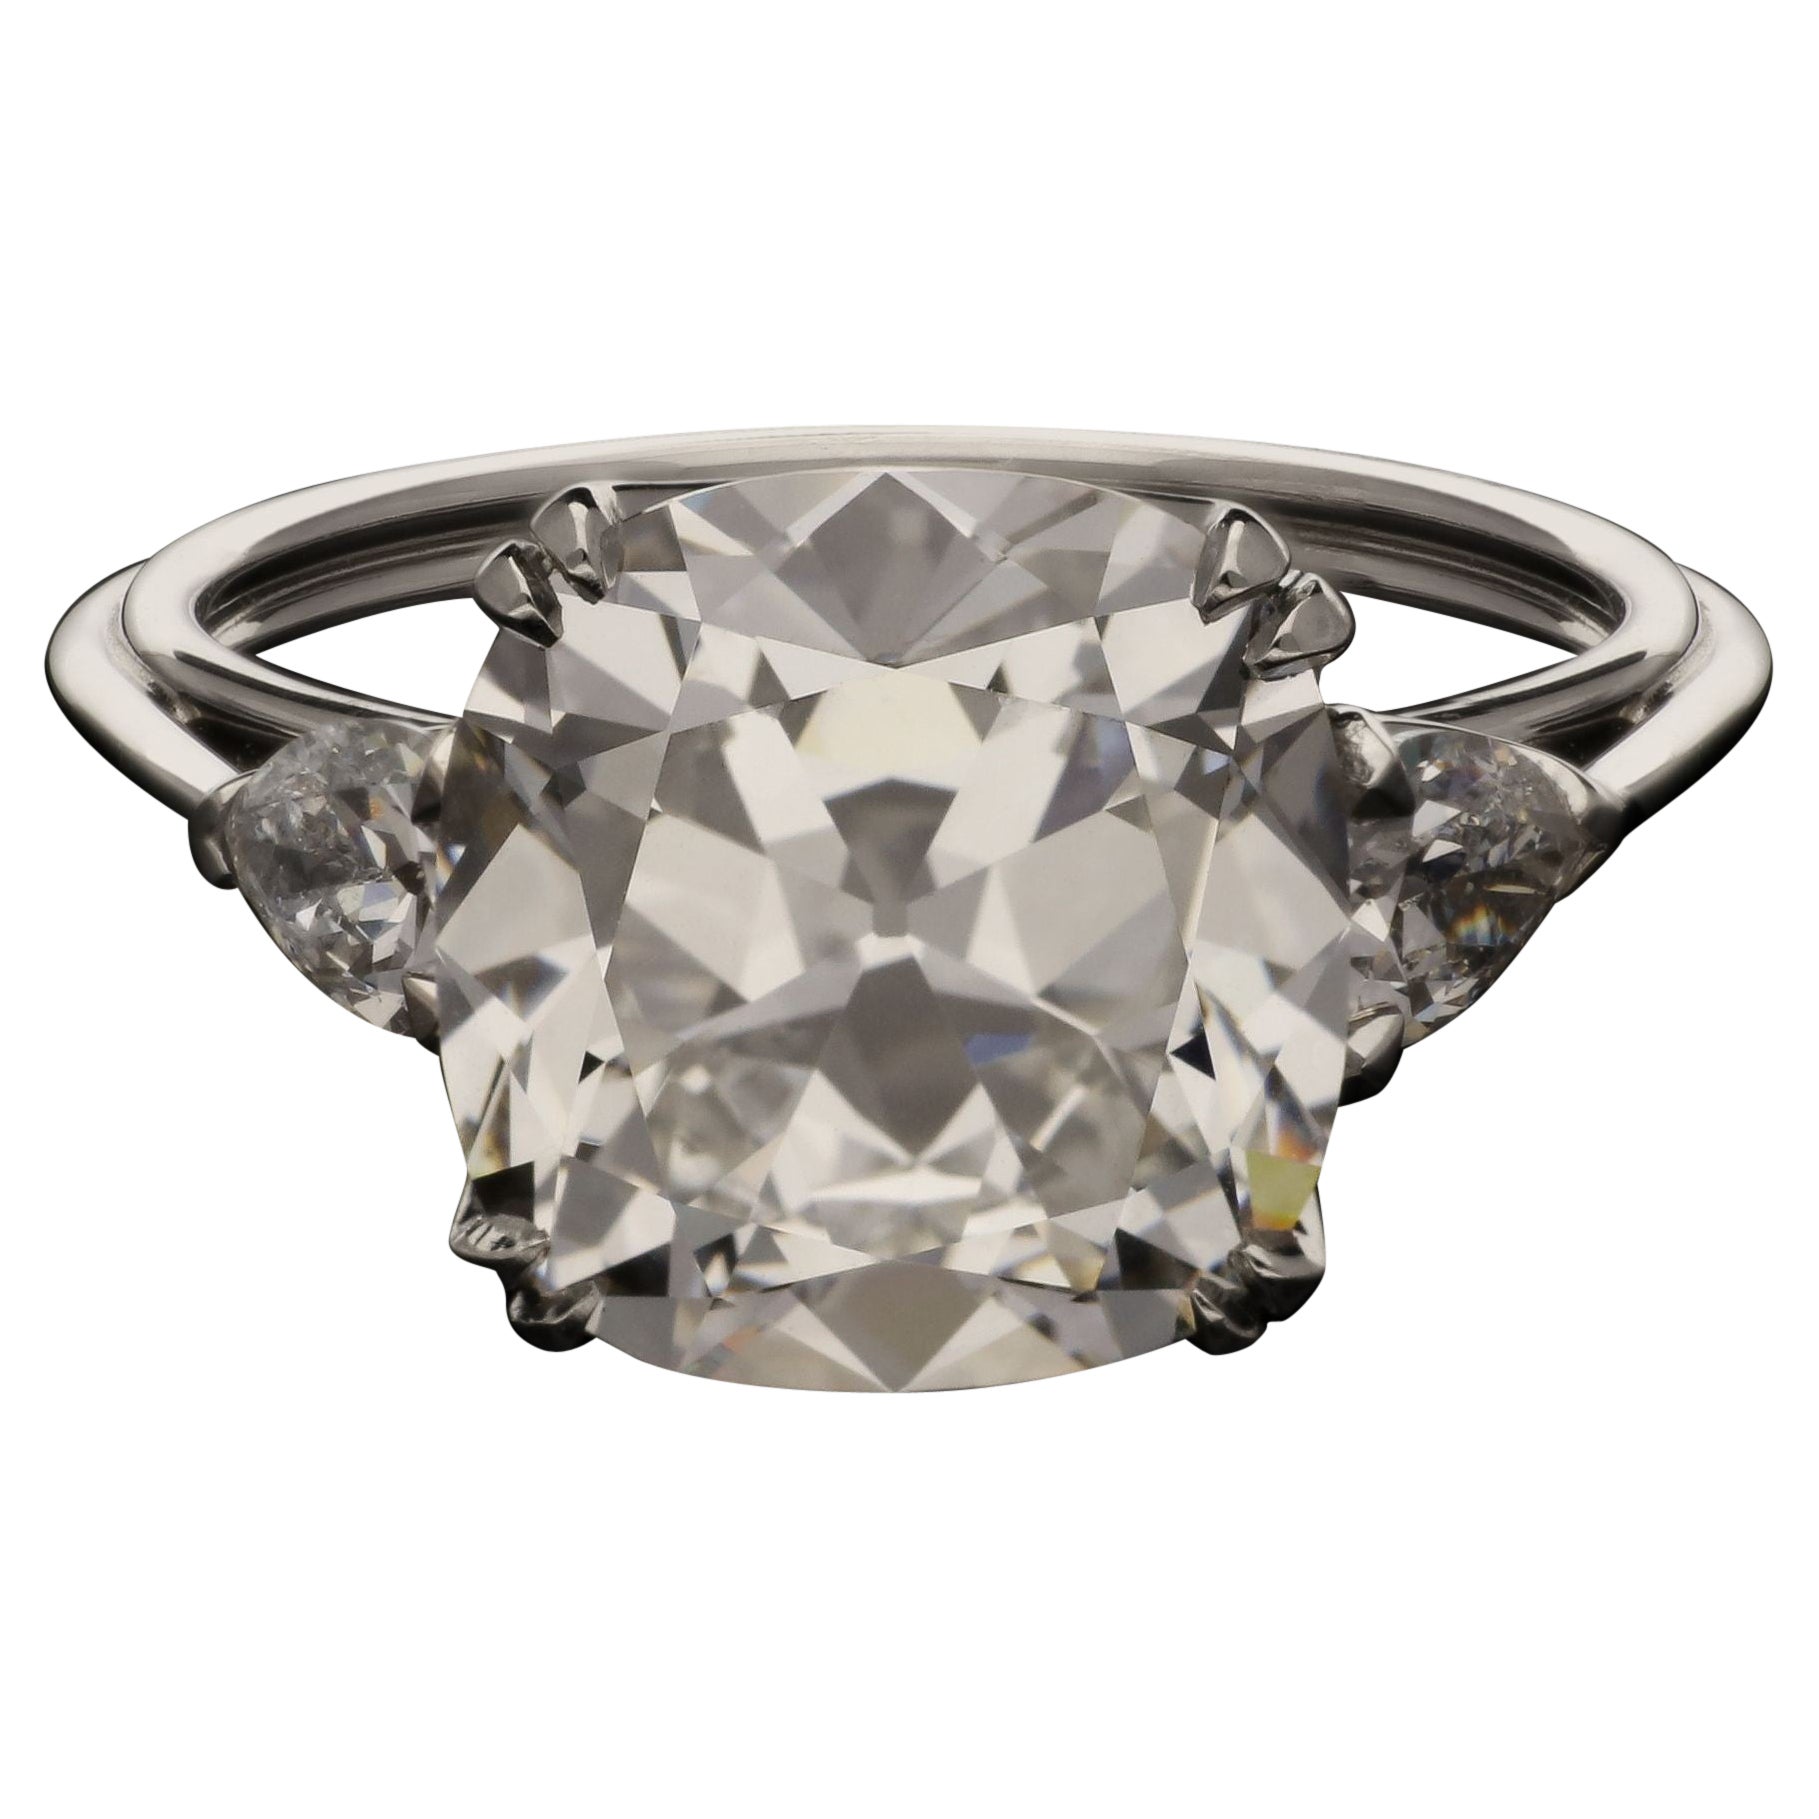 4.63ct Old Mine Brilliant Cut Diamond Ring with Pear Shape Shoulders For Sale